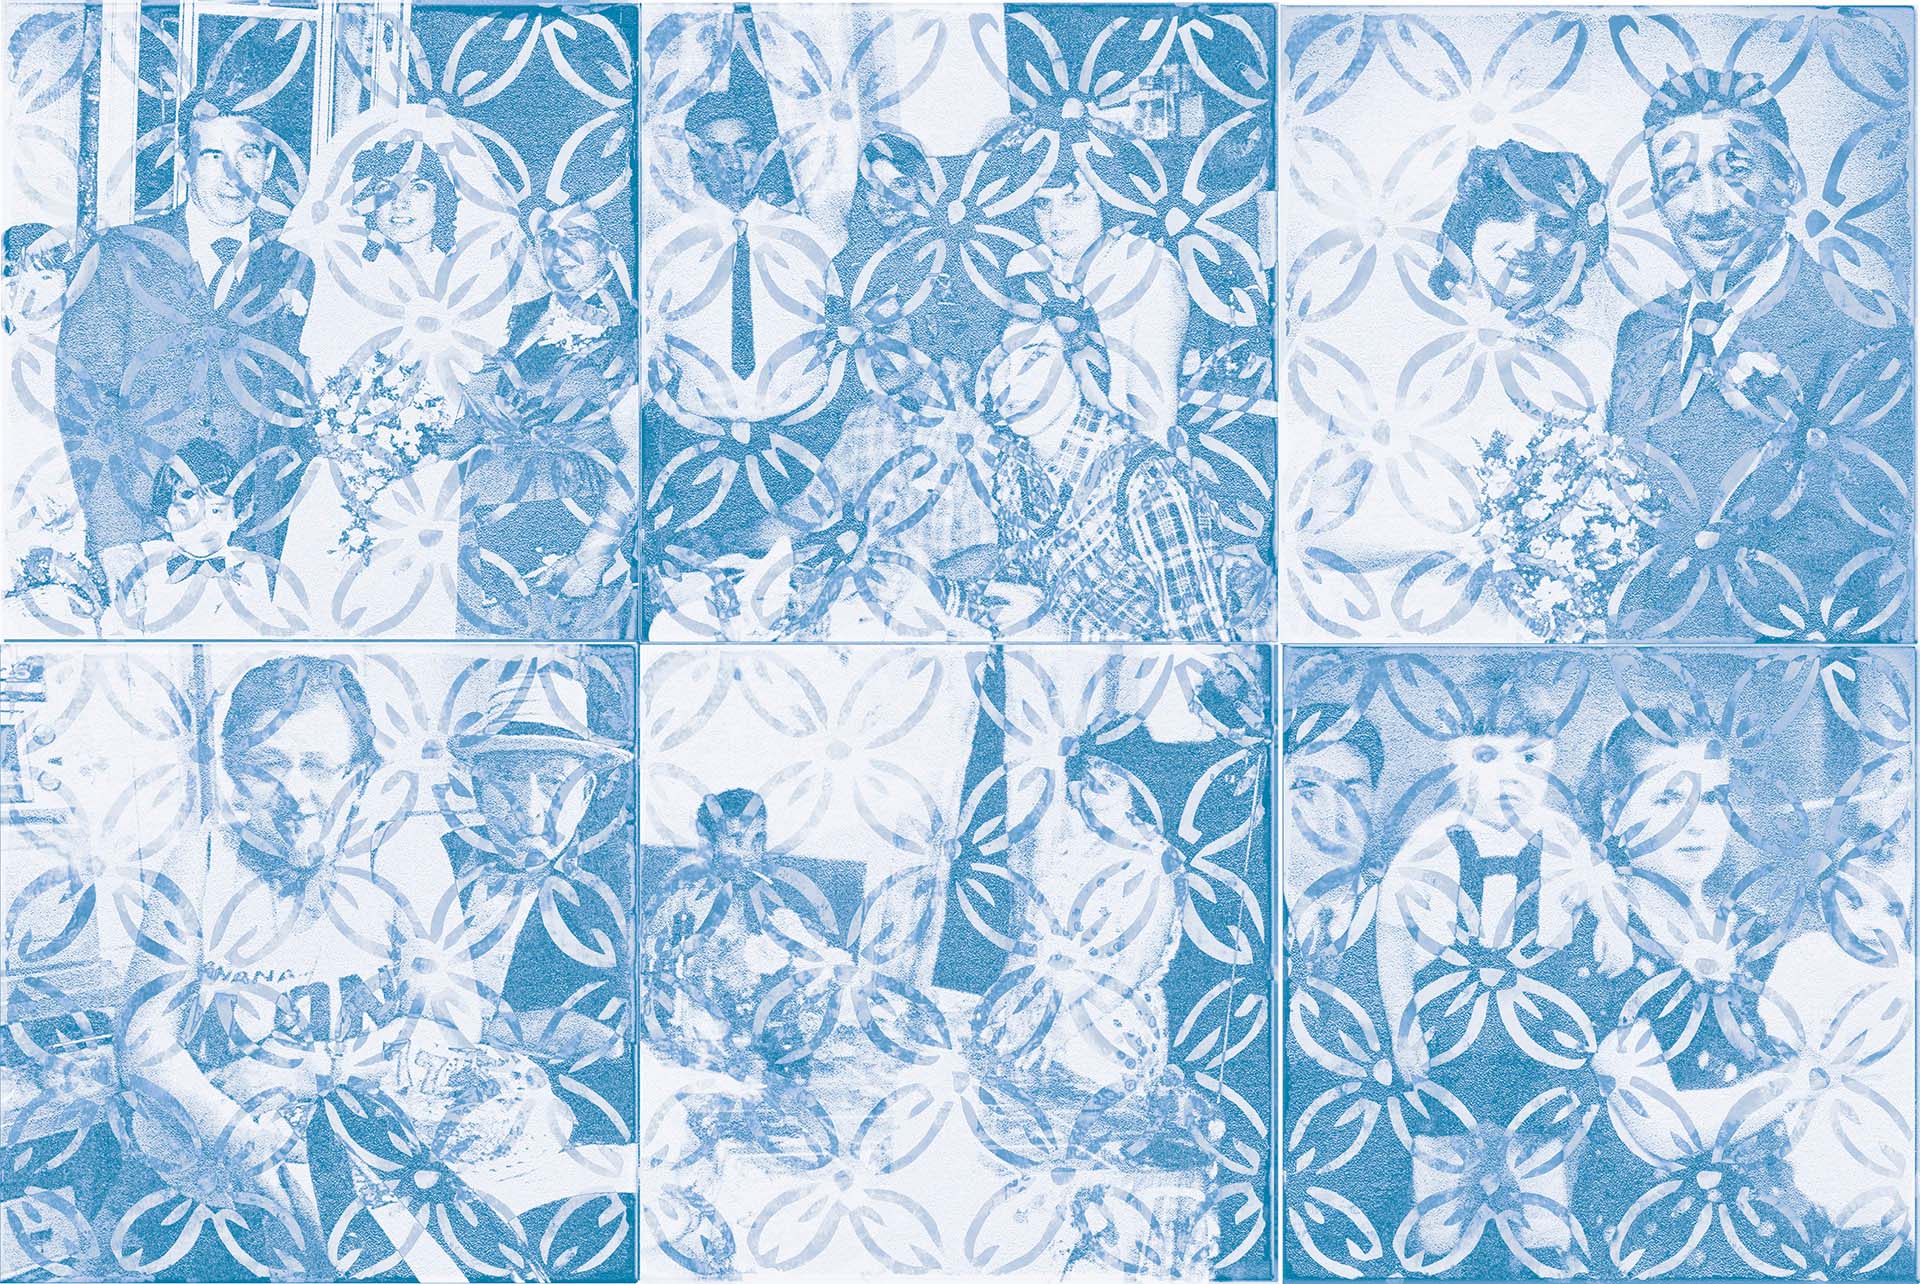 Blue and white portraits of people printed with an overlay of a repeating flower pattern. 